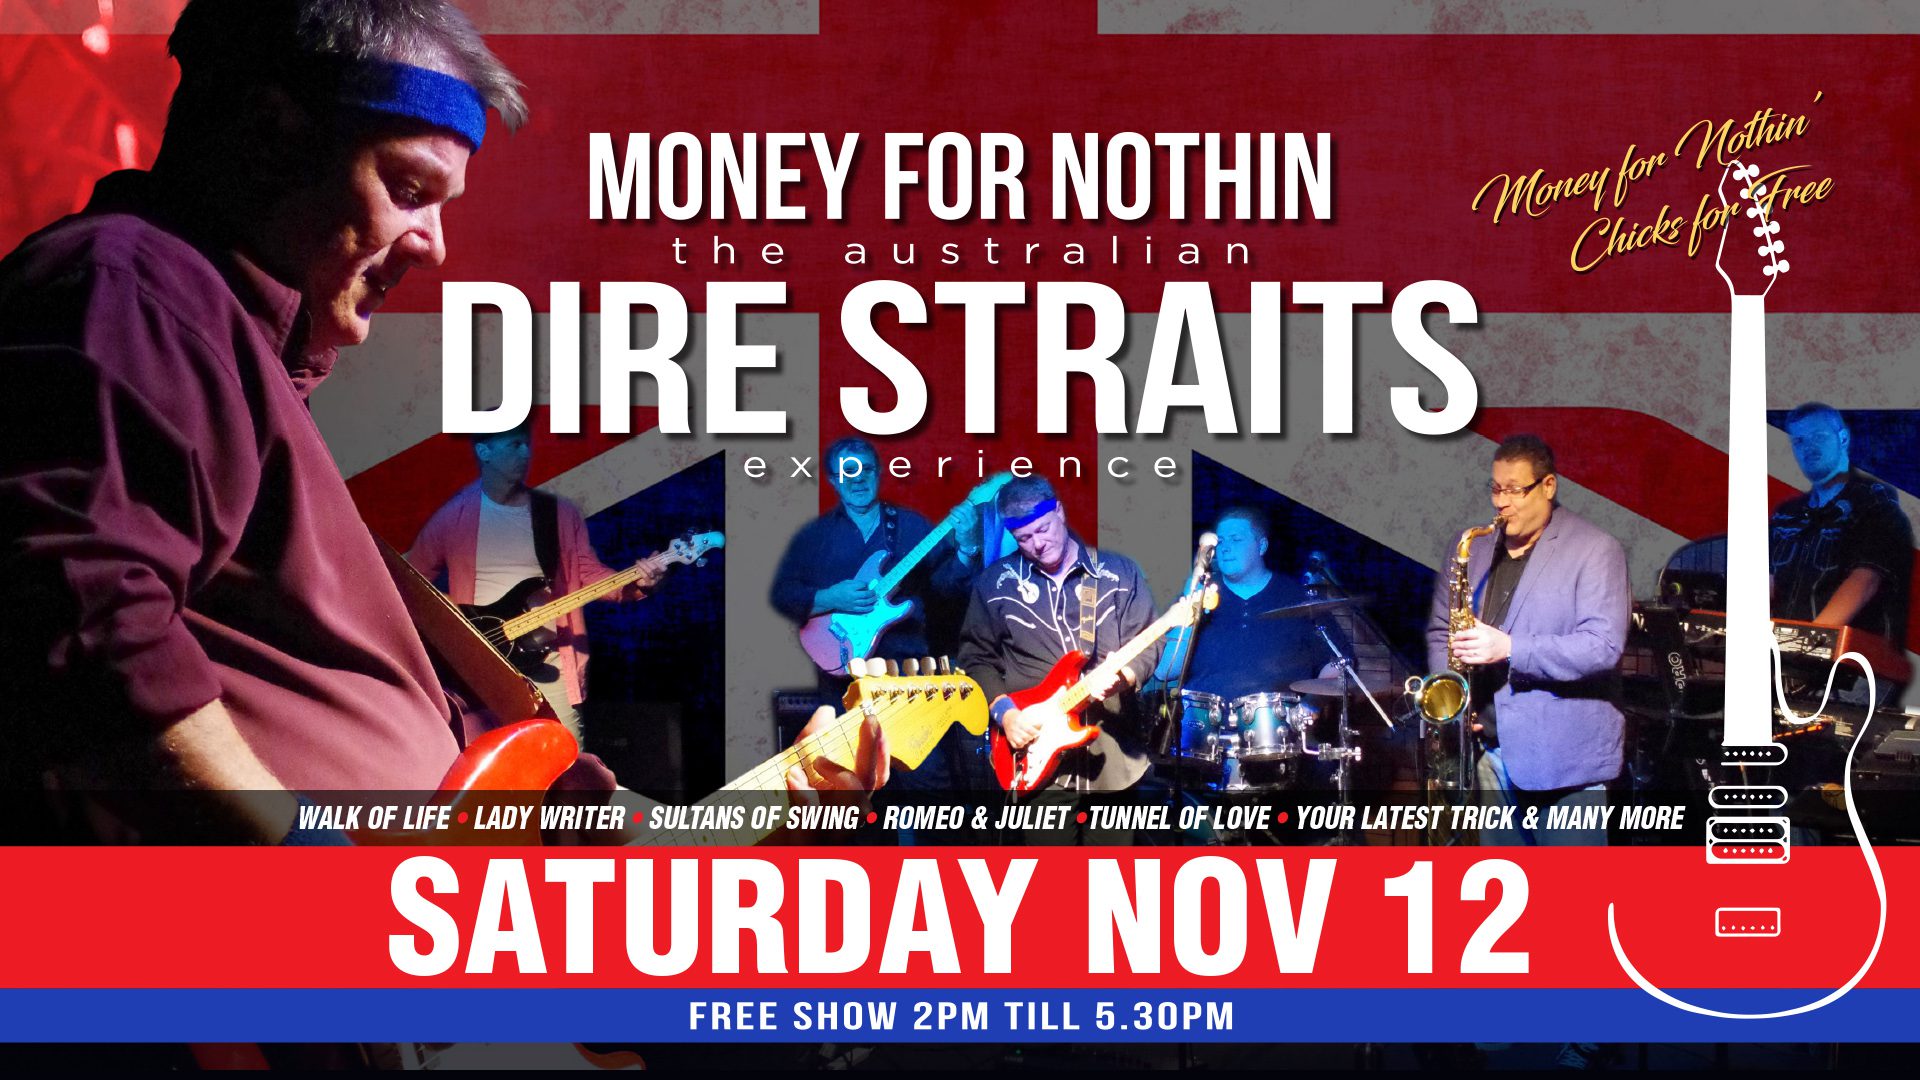 Event Poster for Money For Nothin – Dire Straits Experience | Airlie Beach | EventsontheHorizon.com